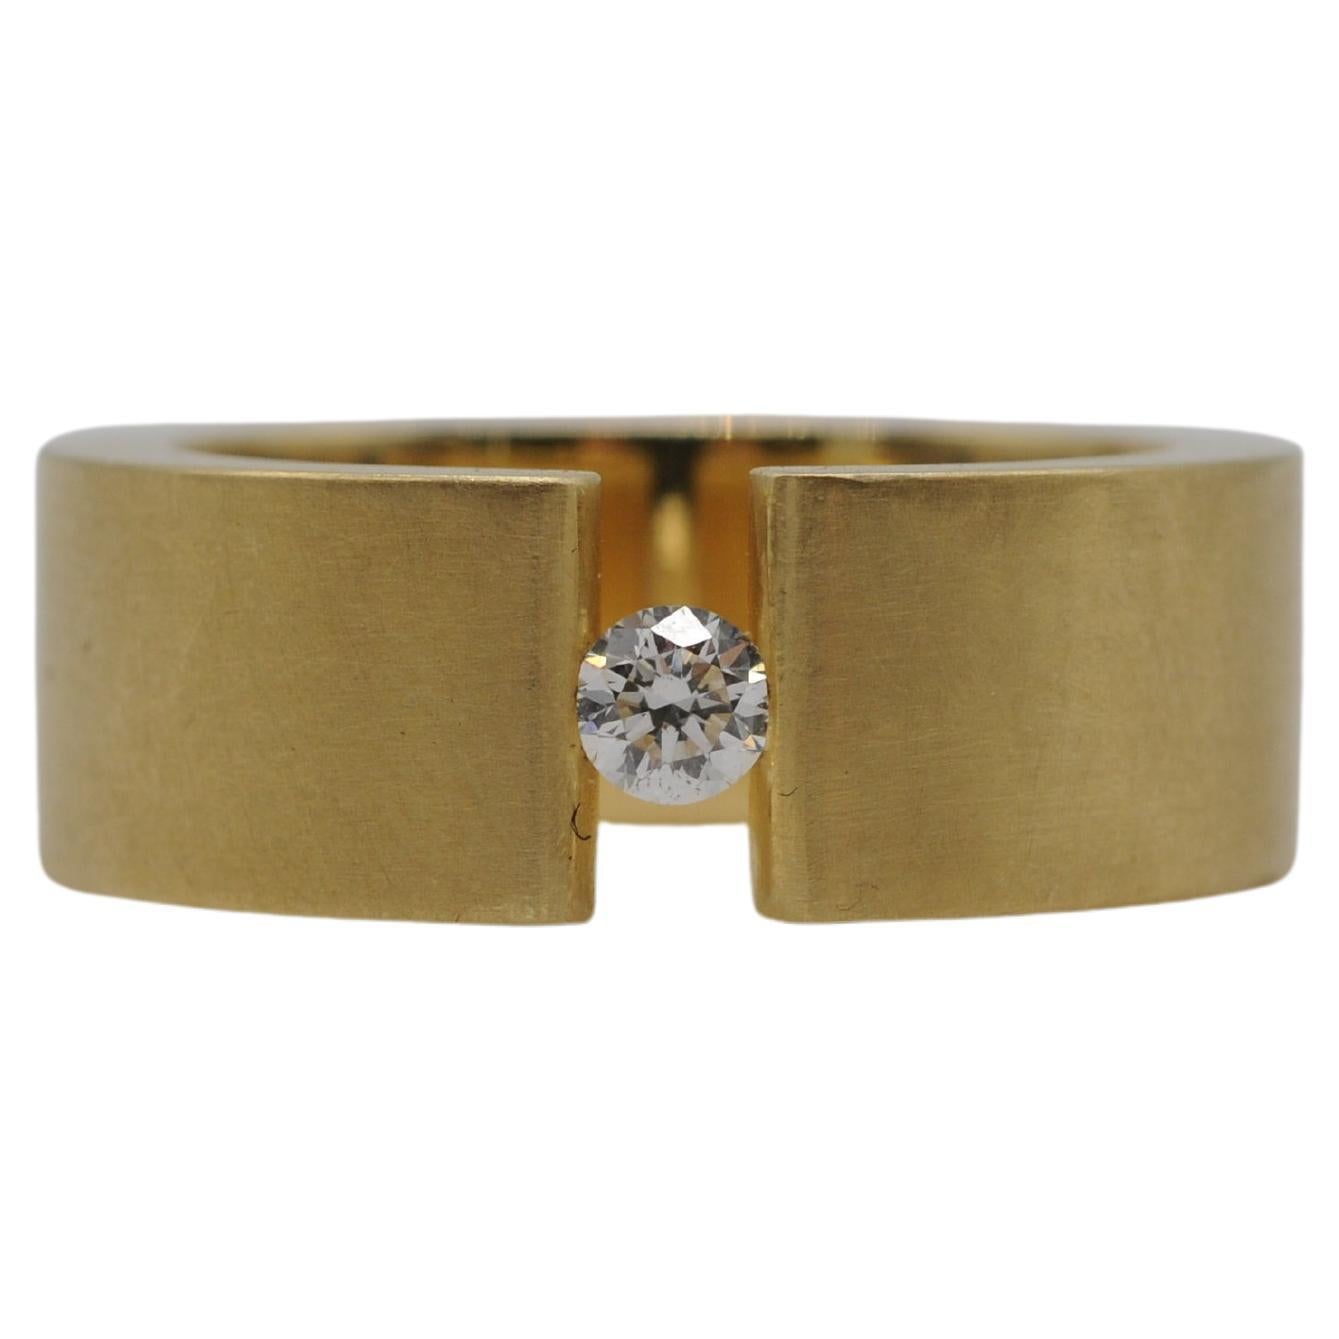 Aesthetic Movement Niessing tension ring in 18k yellow gold with a brilliant For Sale